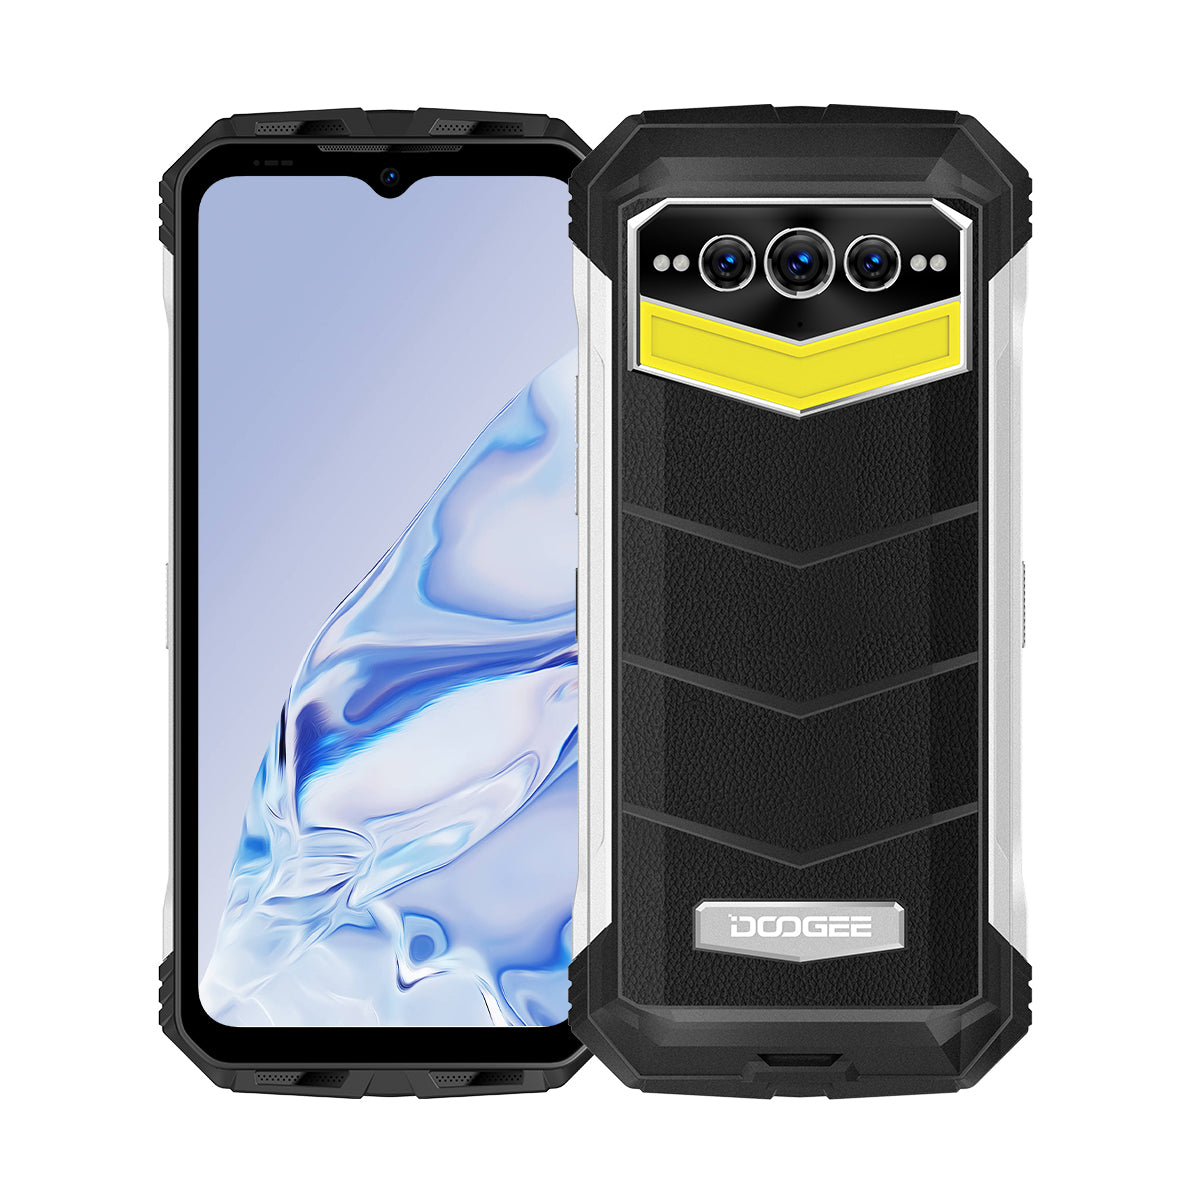 THE ULTIMATE RUGGED SMART PHONE - DOOGEE S100 PRO Rugged Smartphone Review  